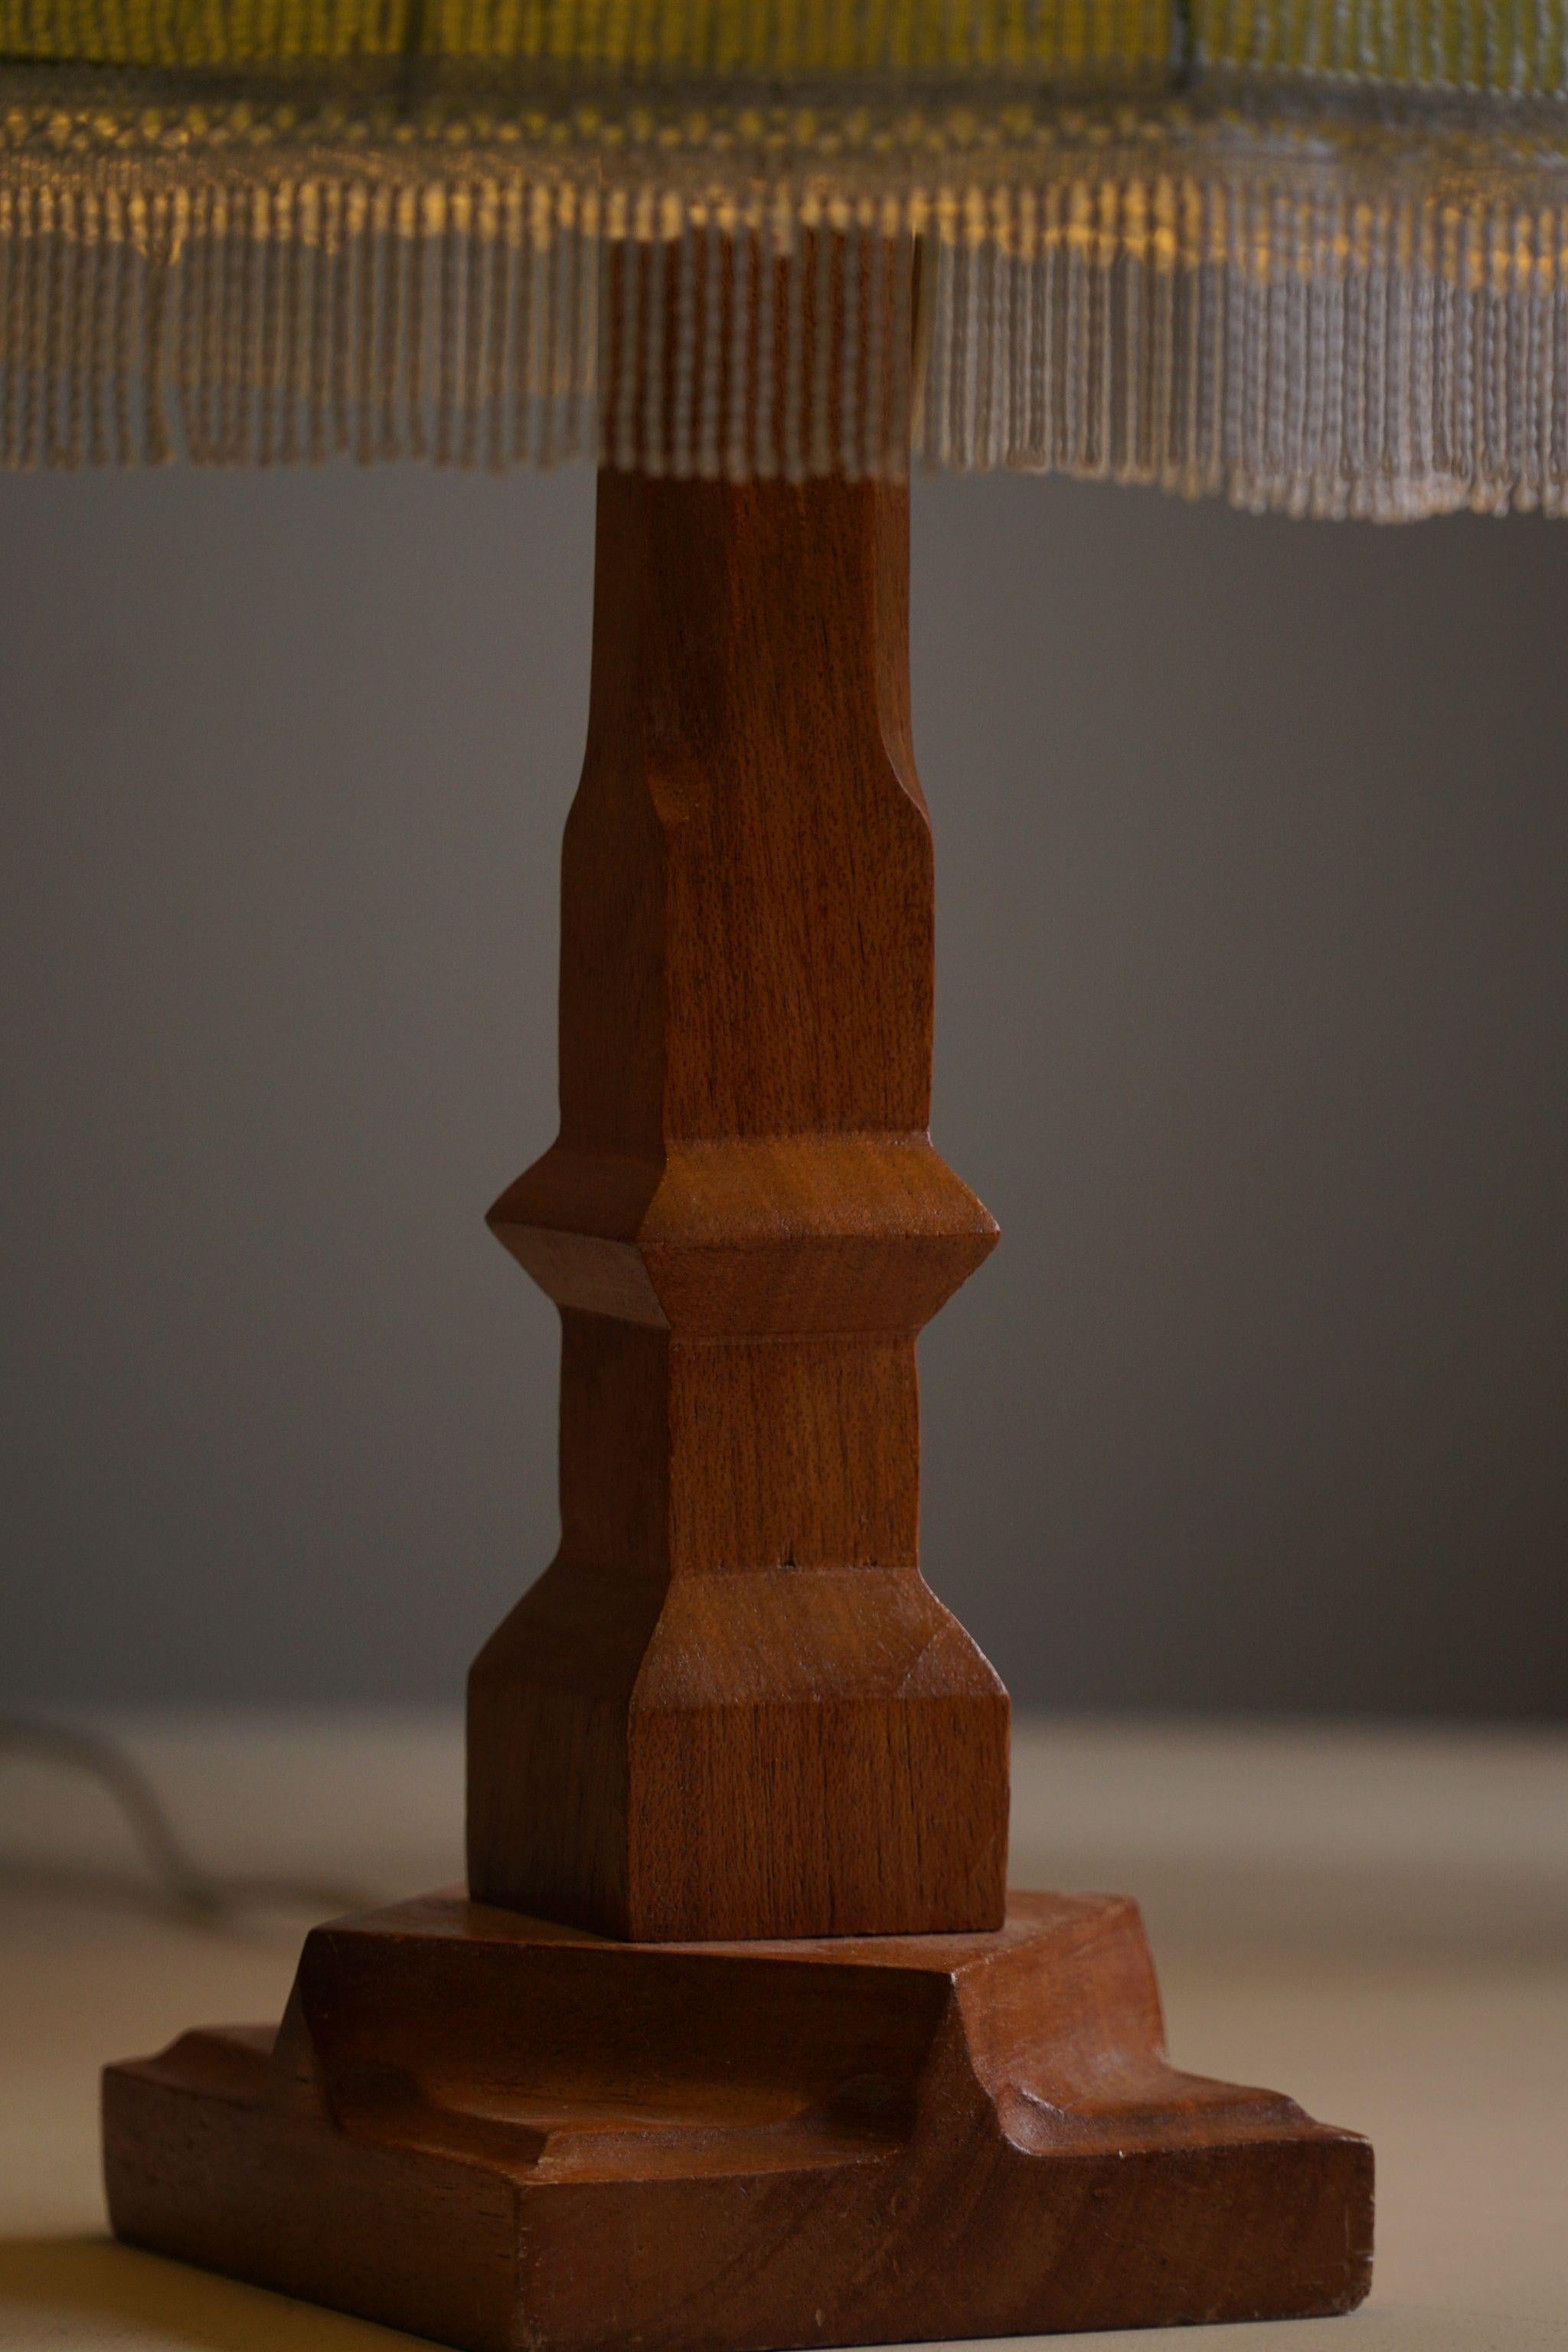 A Pair of Scandinavian Modern Table Lamps in Teak, 1970s For Sale 2